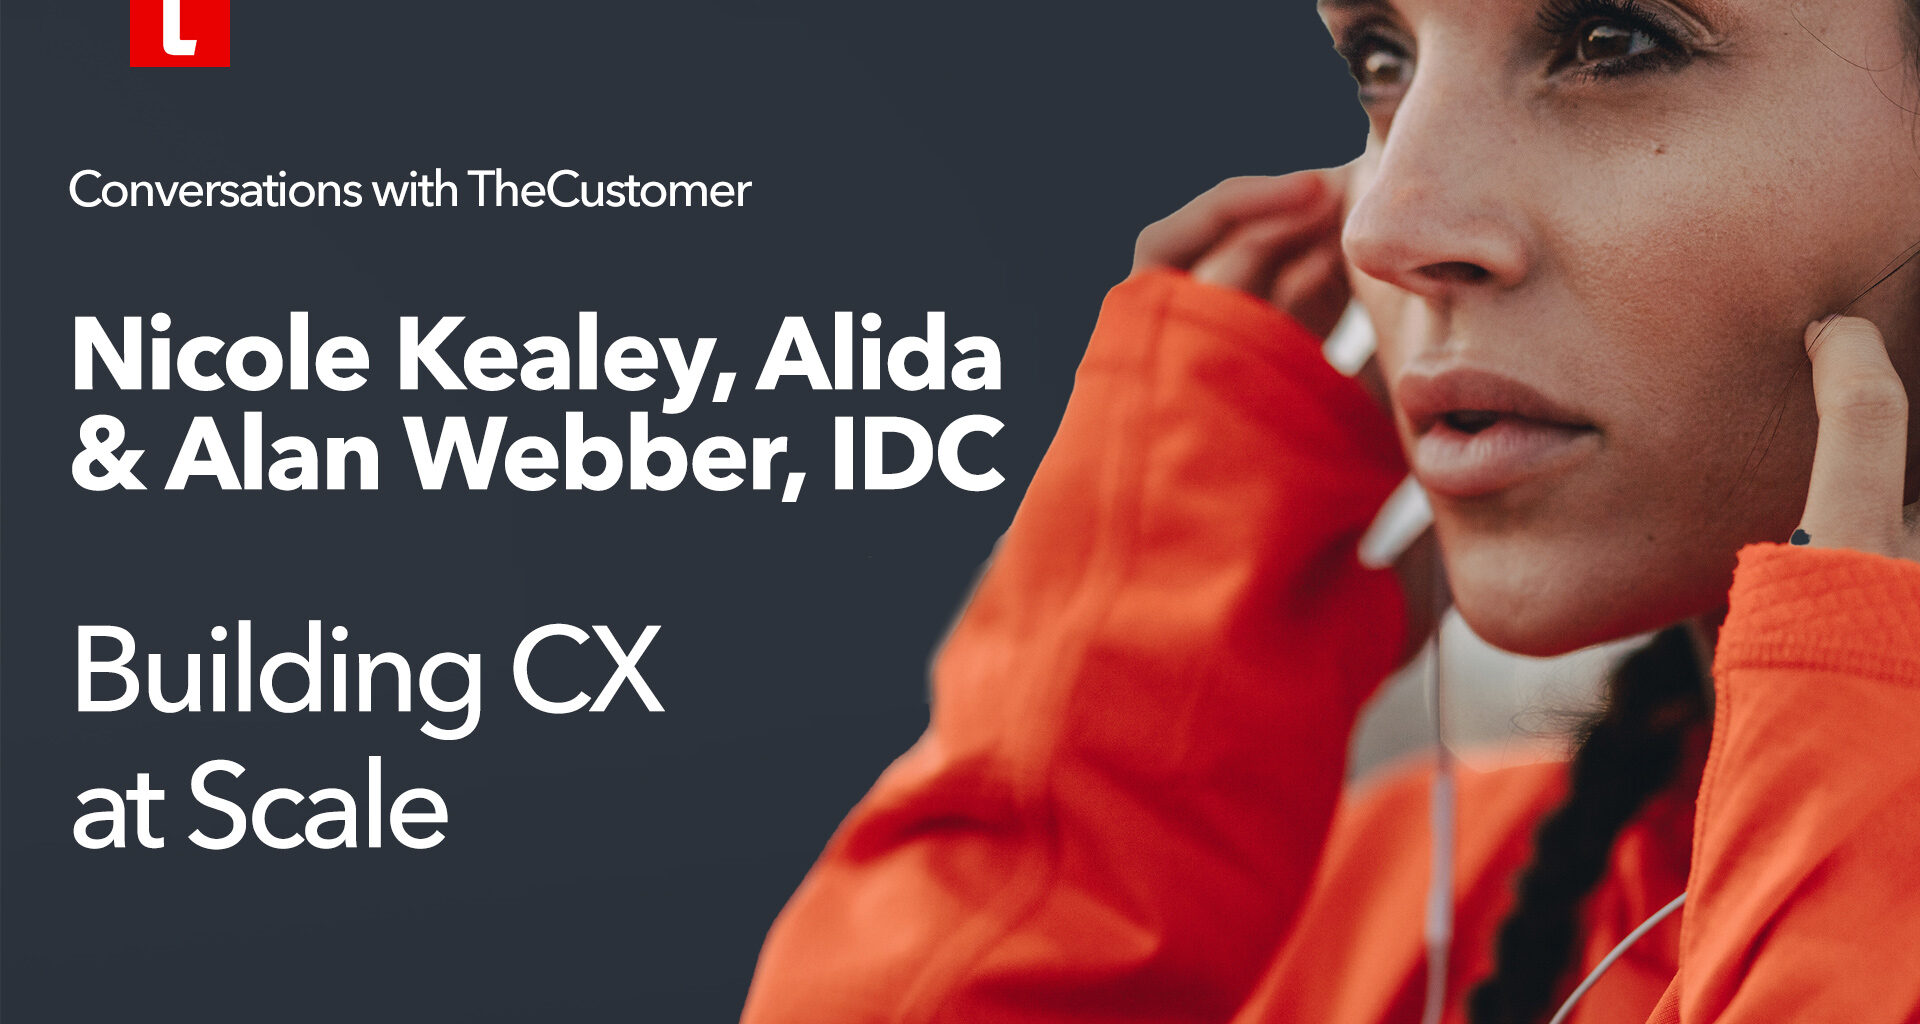 executing great CX